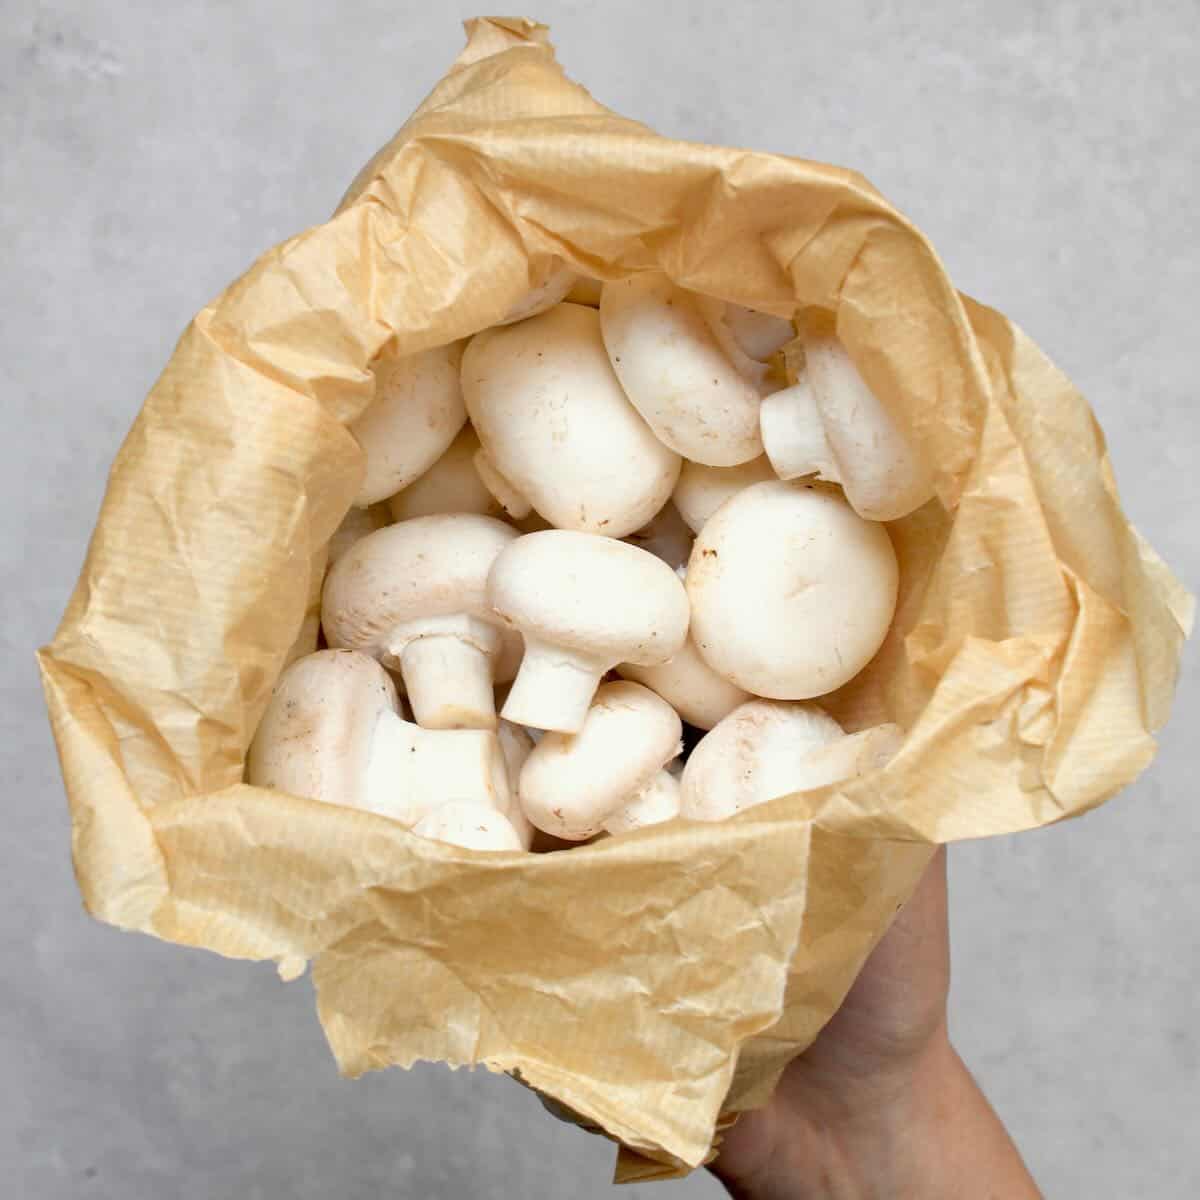 A bag with mushrooms